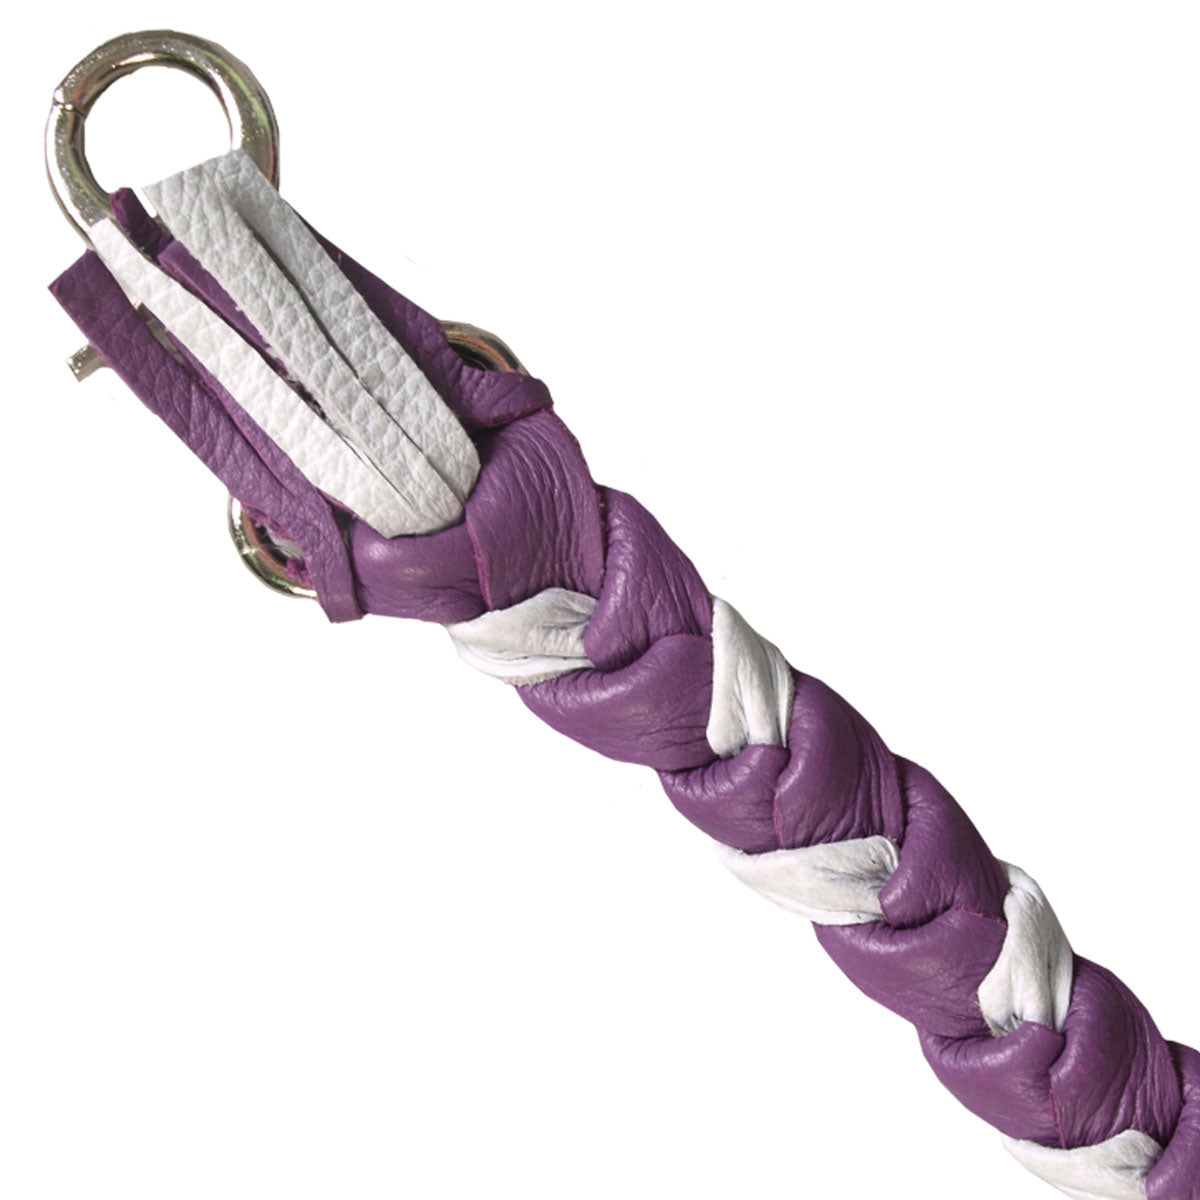 Hot Leathers 9" White and Purple Braided Leather Keychain